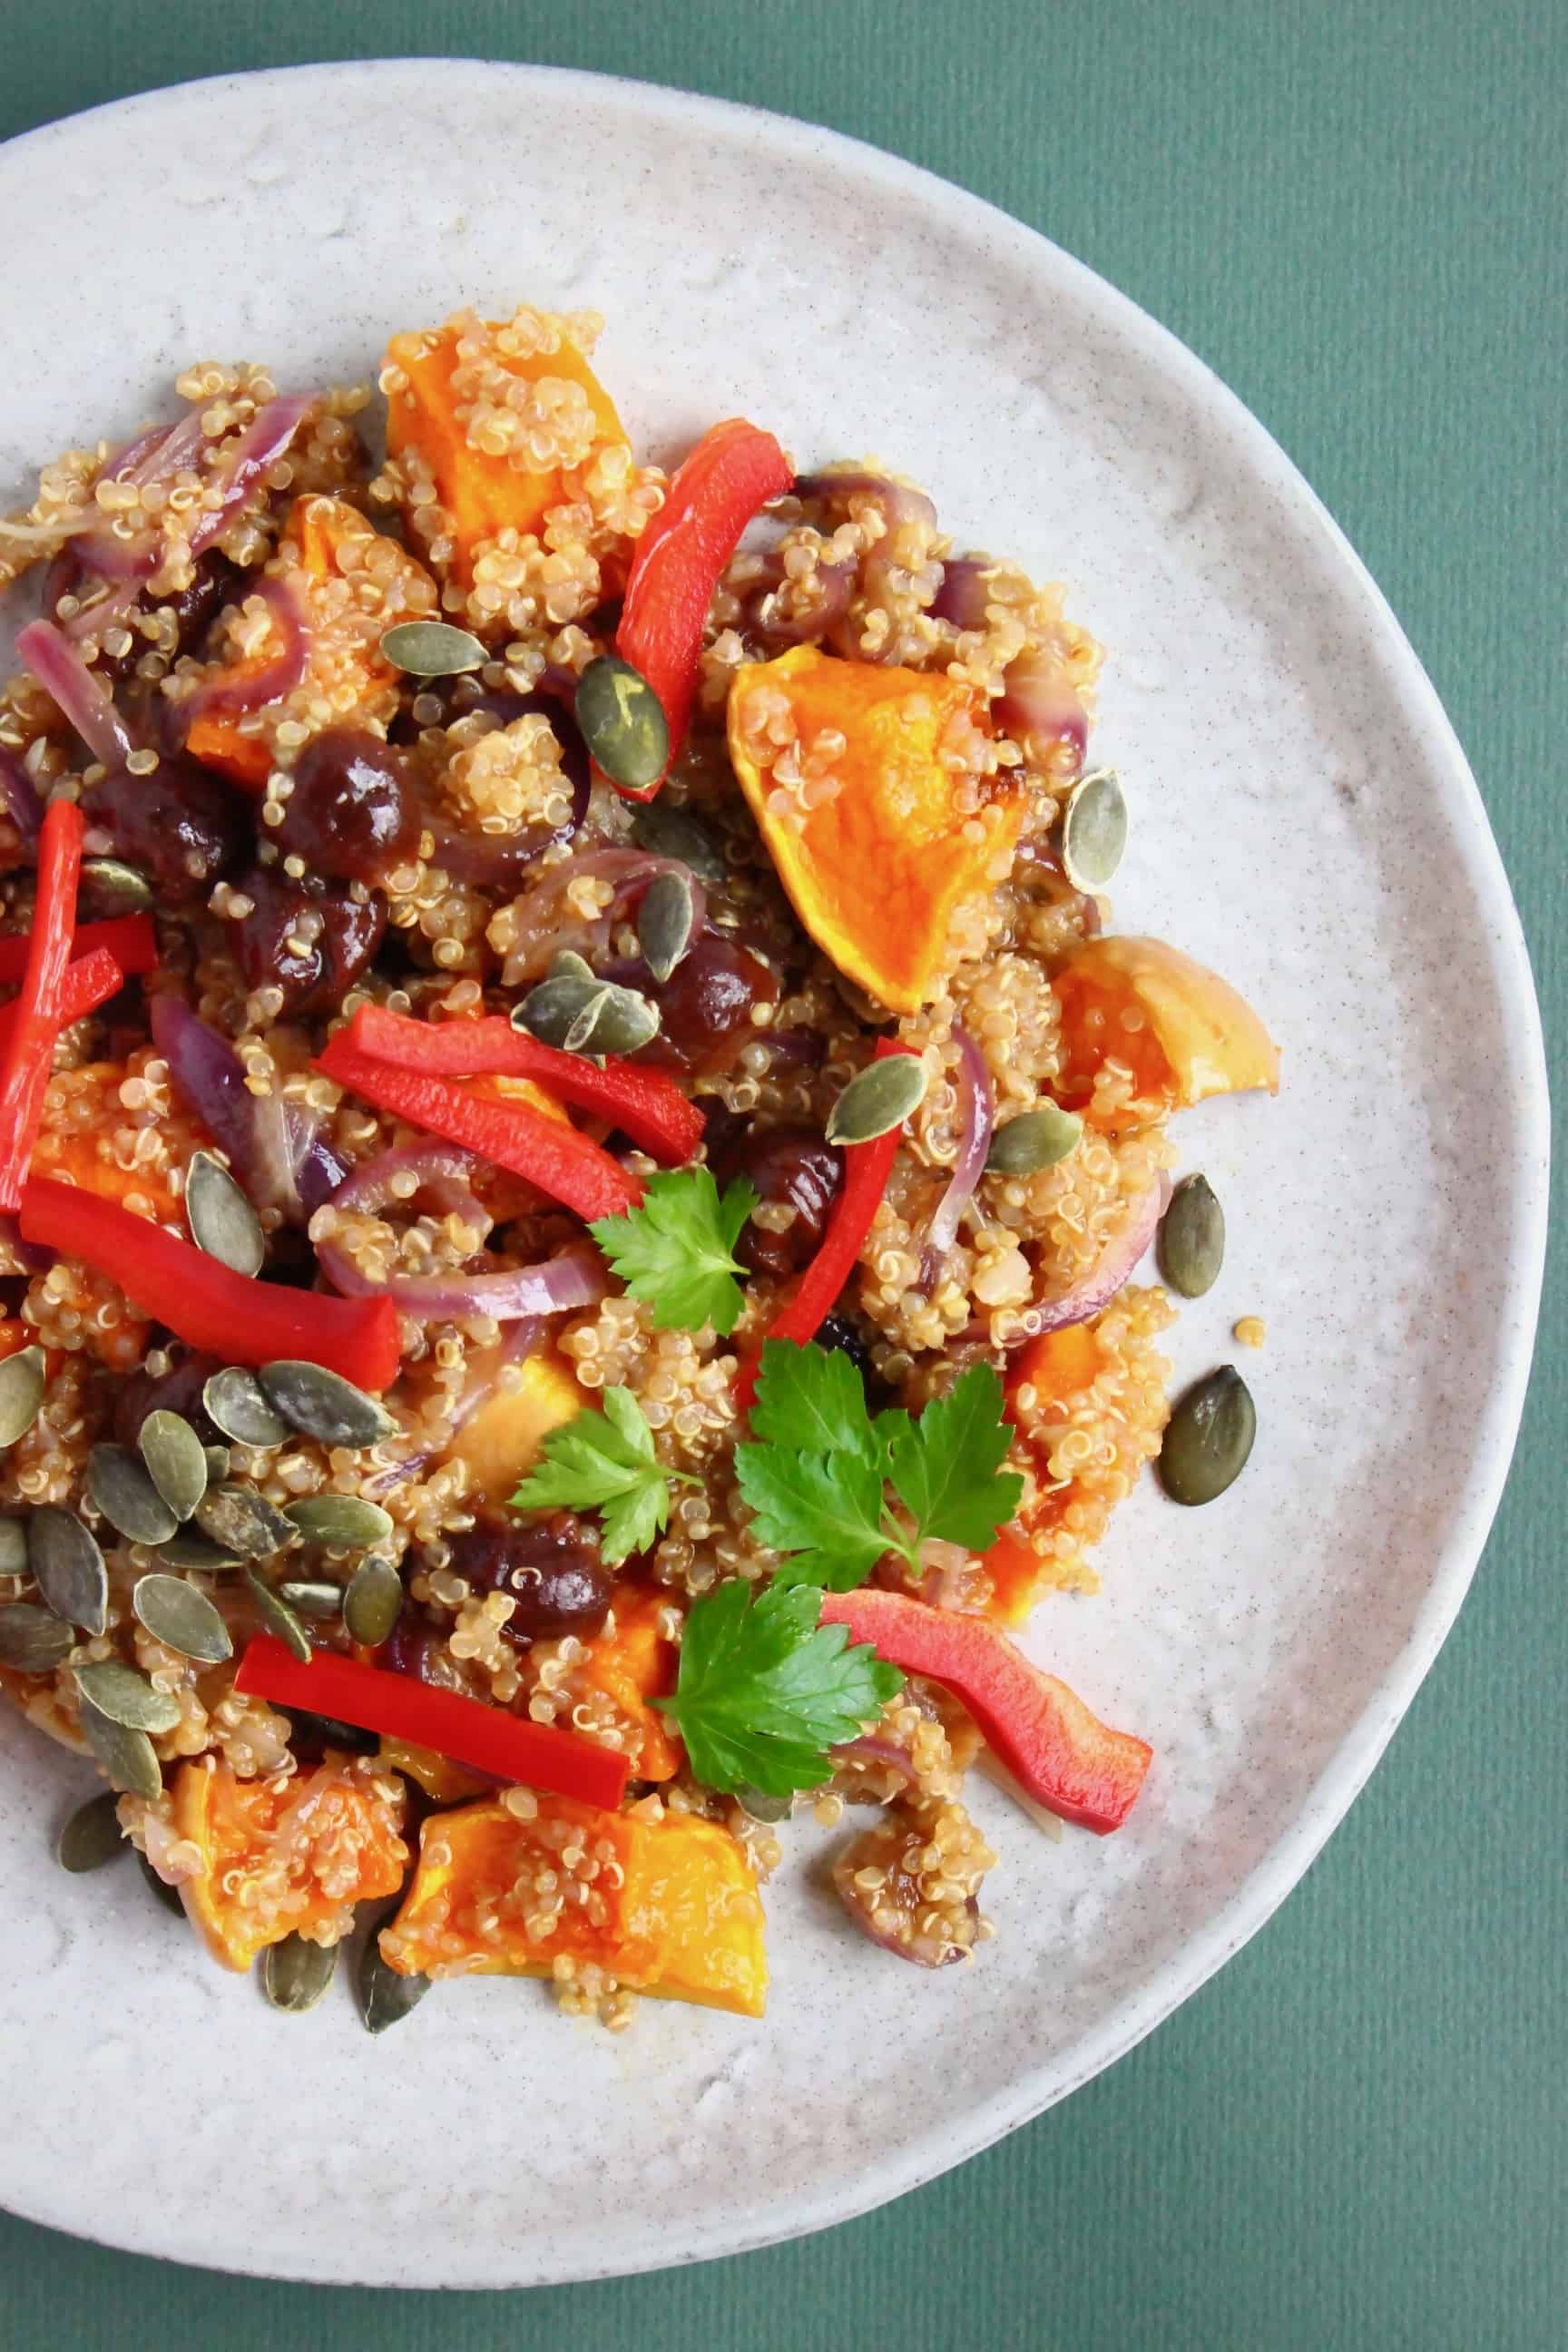 Quinoa, roasted pumpkin and sliced red pepper salad on a grey plate against a dark green background